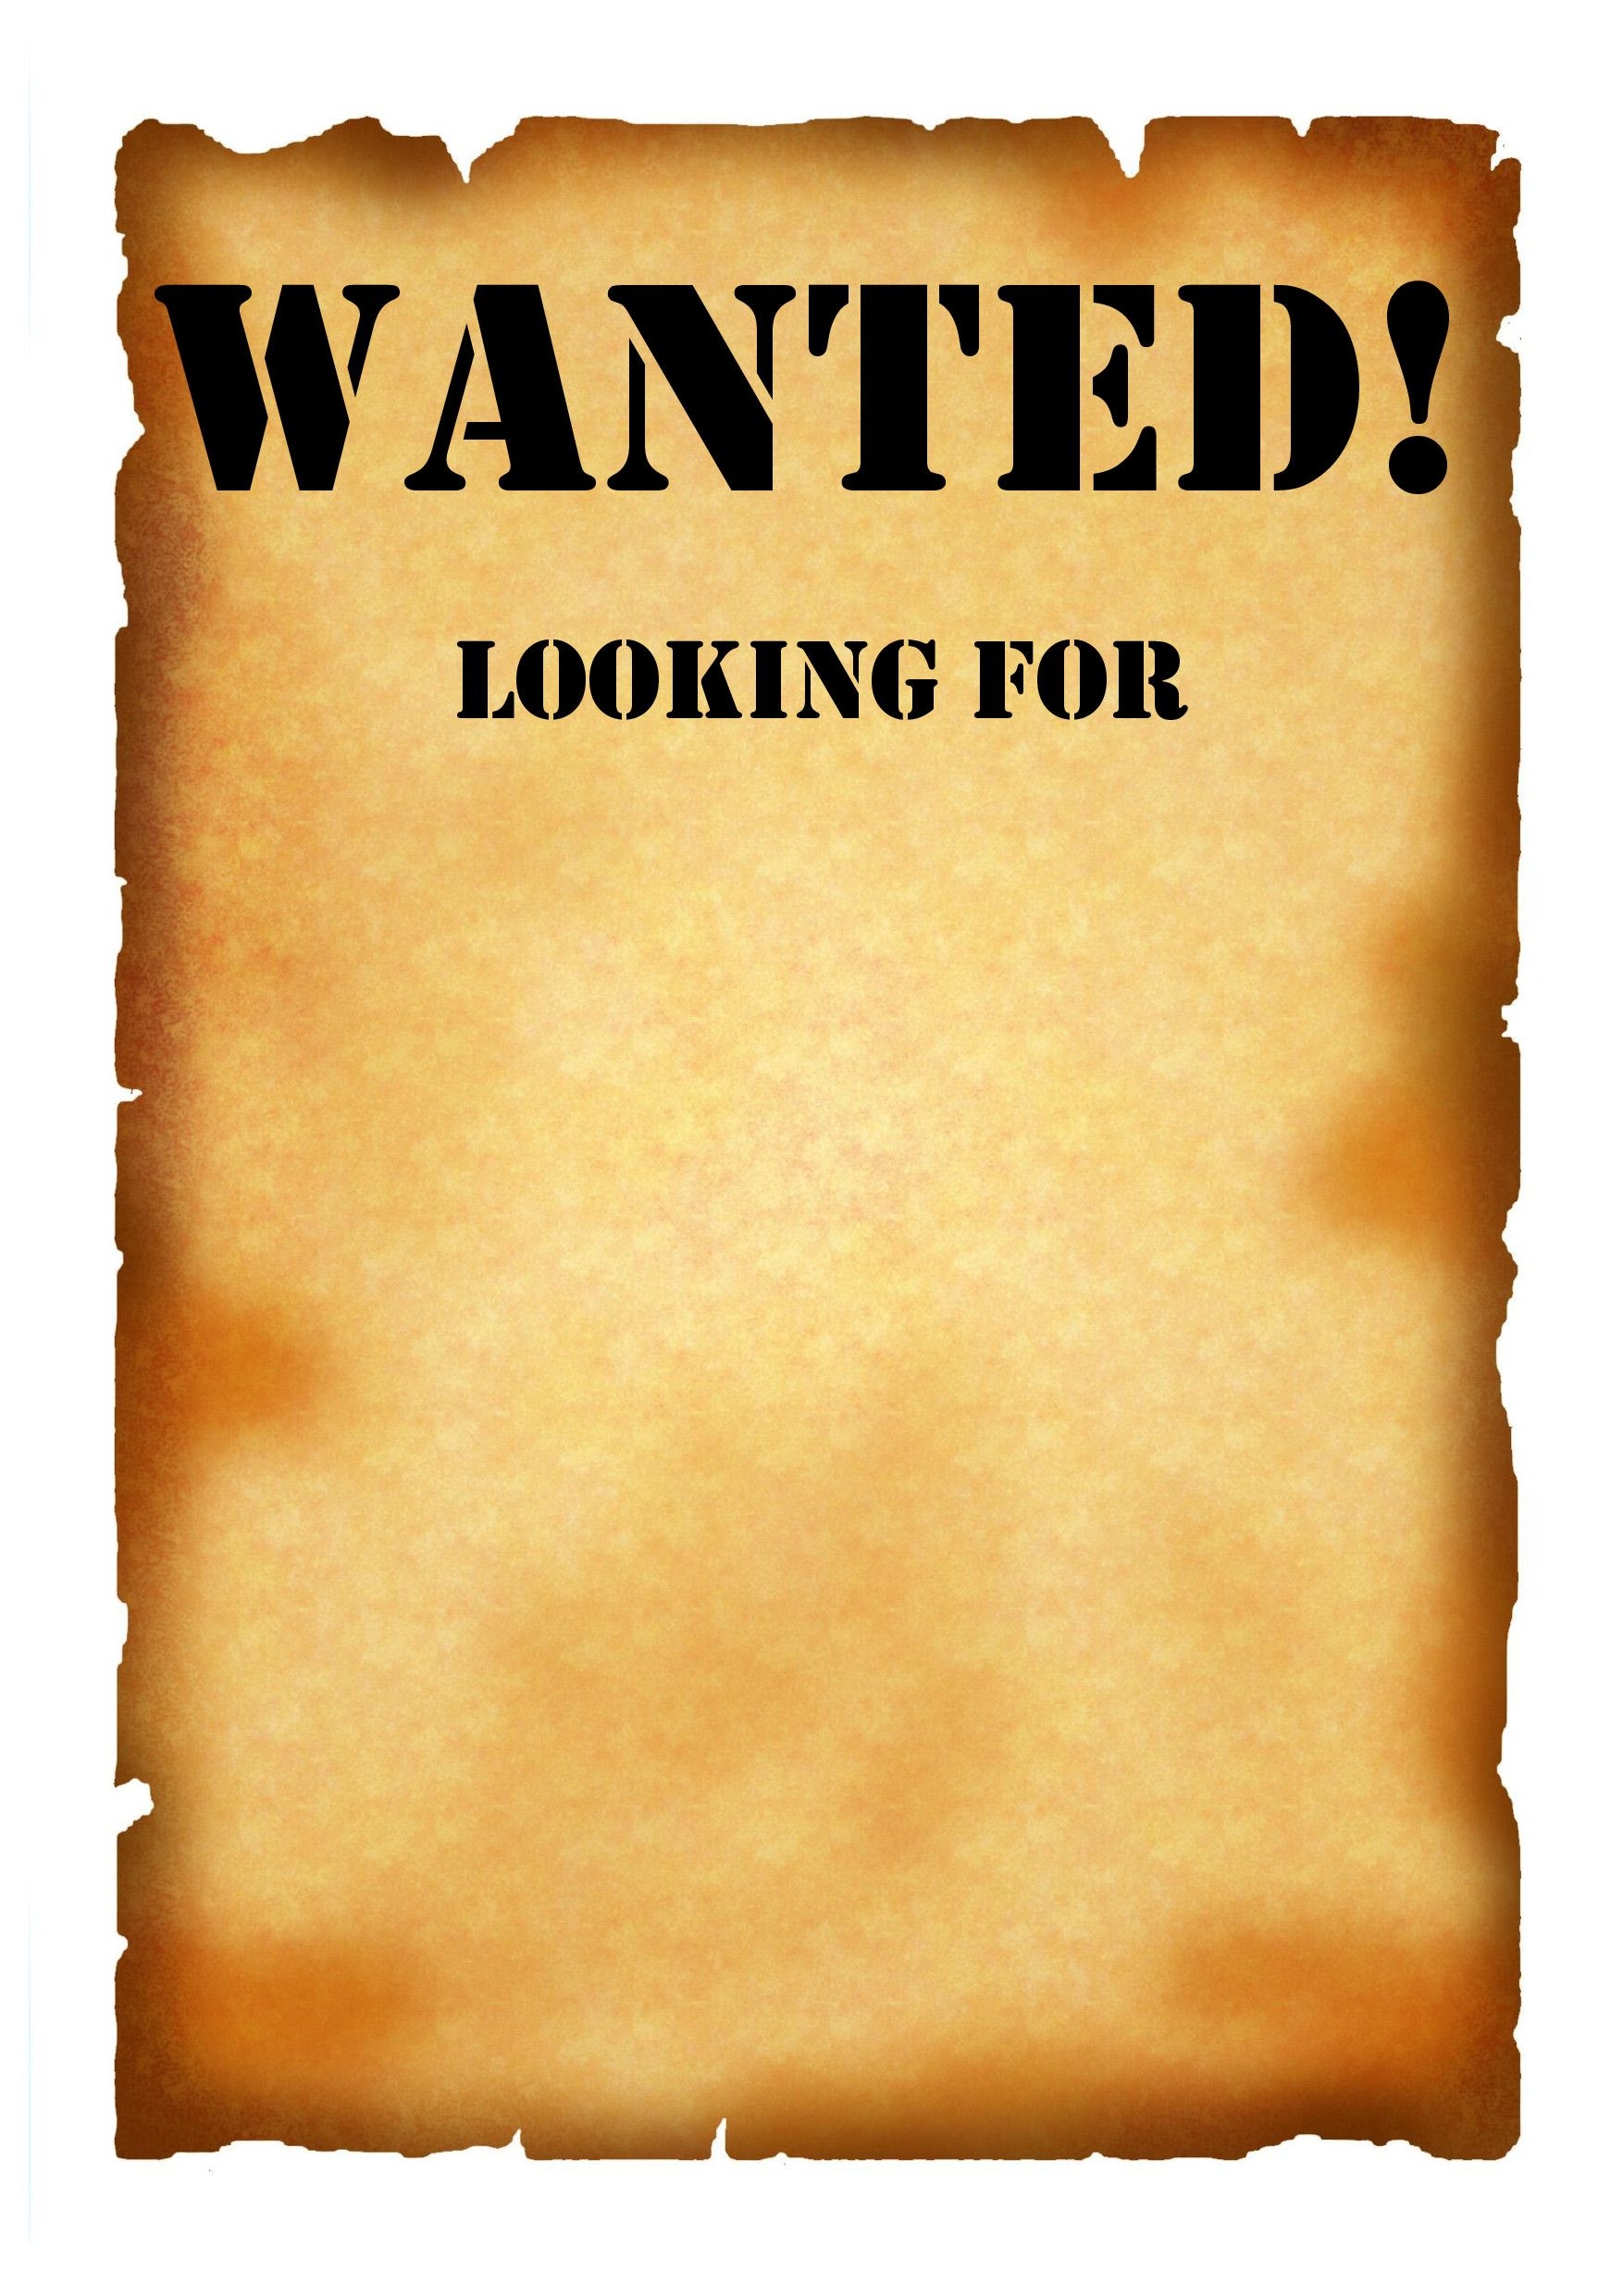 Wanted Poster Template Free Download